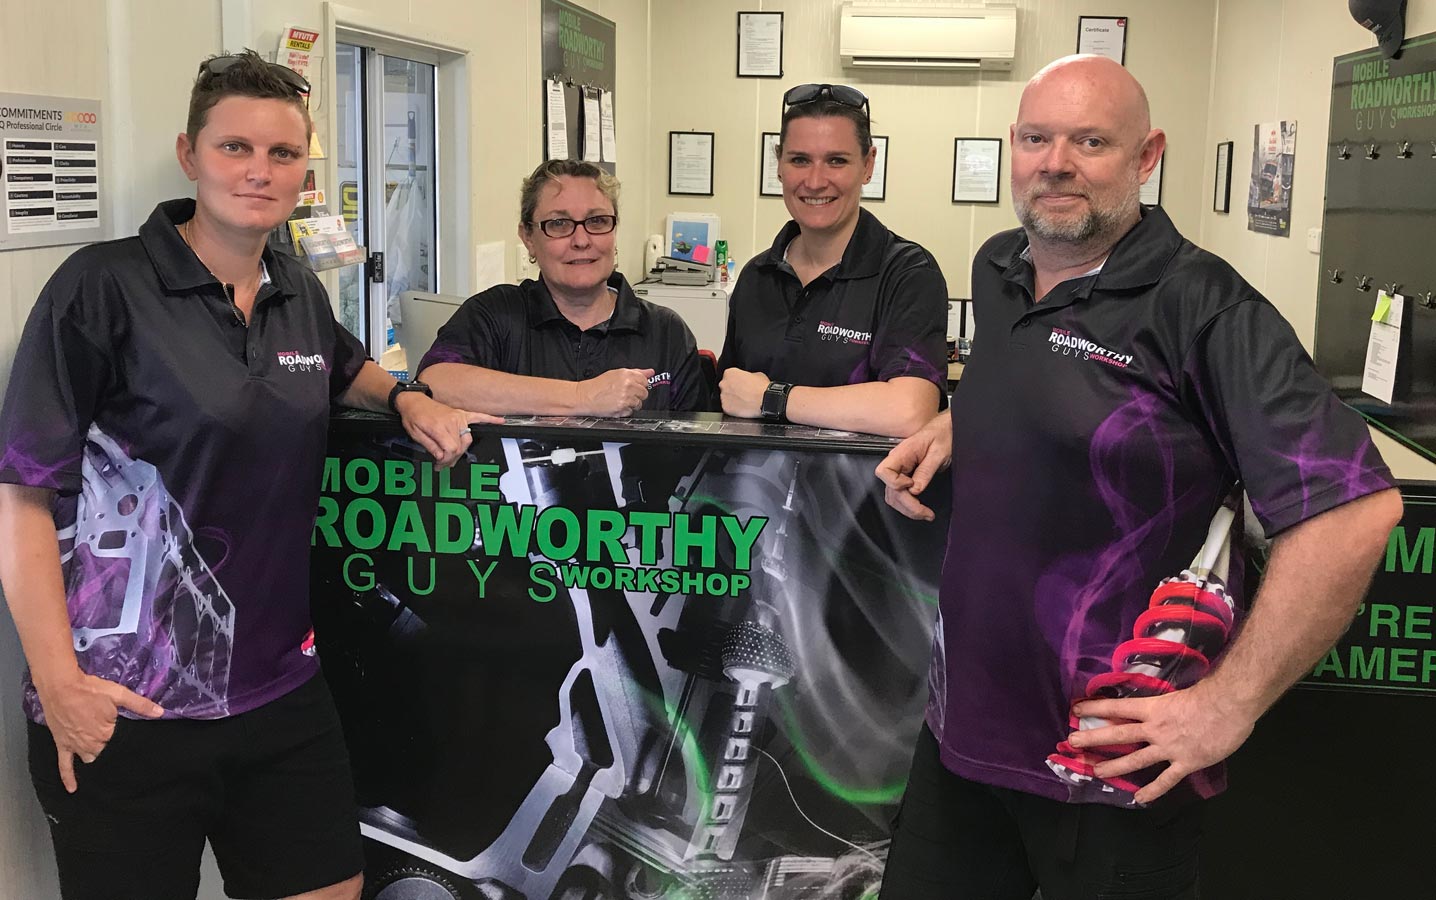 Employee of Mobile Roadworthy Guys — Mobile Roadworthy Guys Townsville in Aitkenvale, QLD